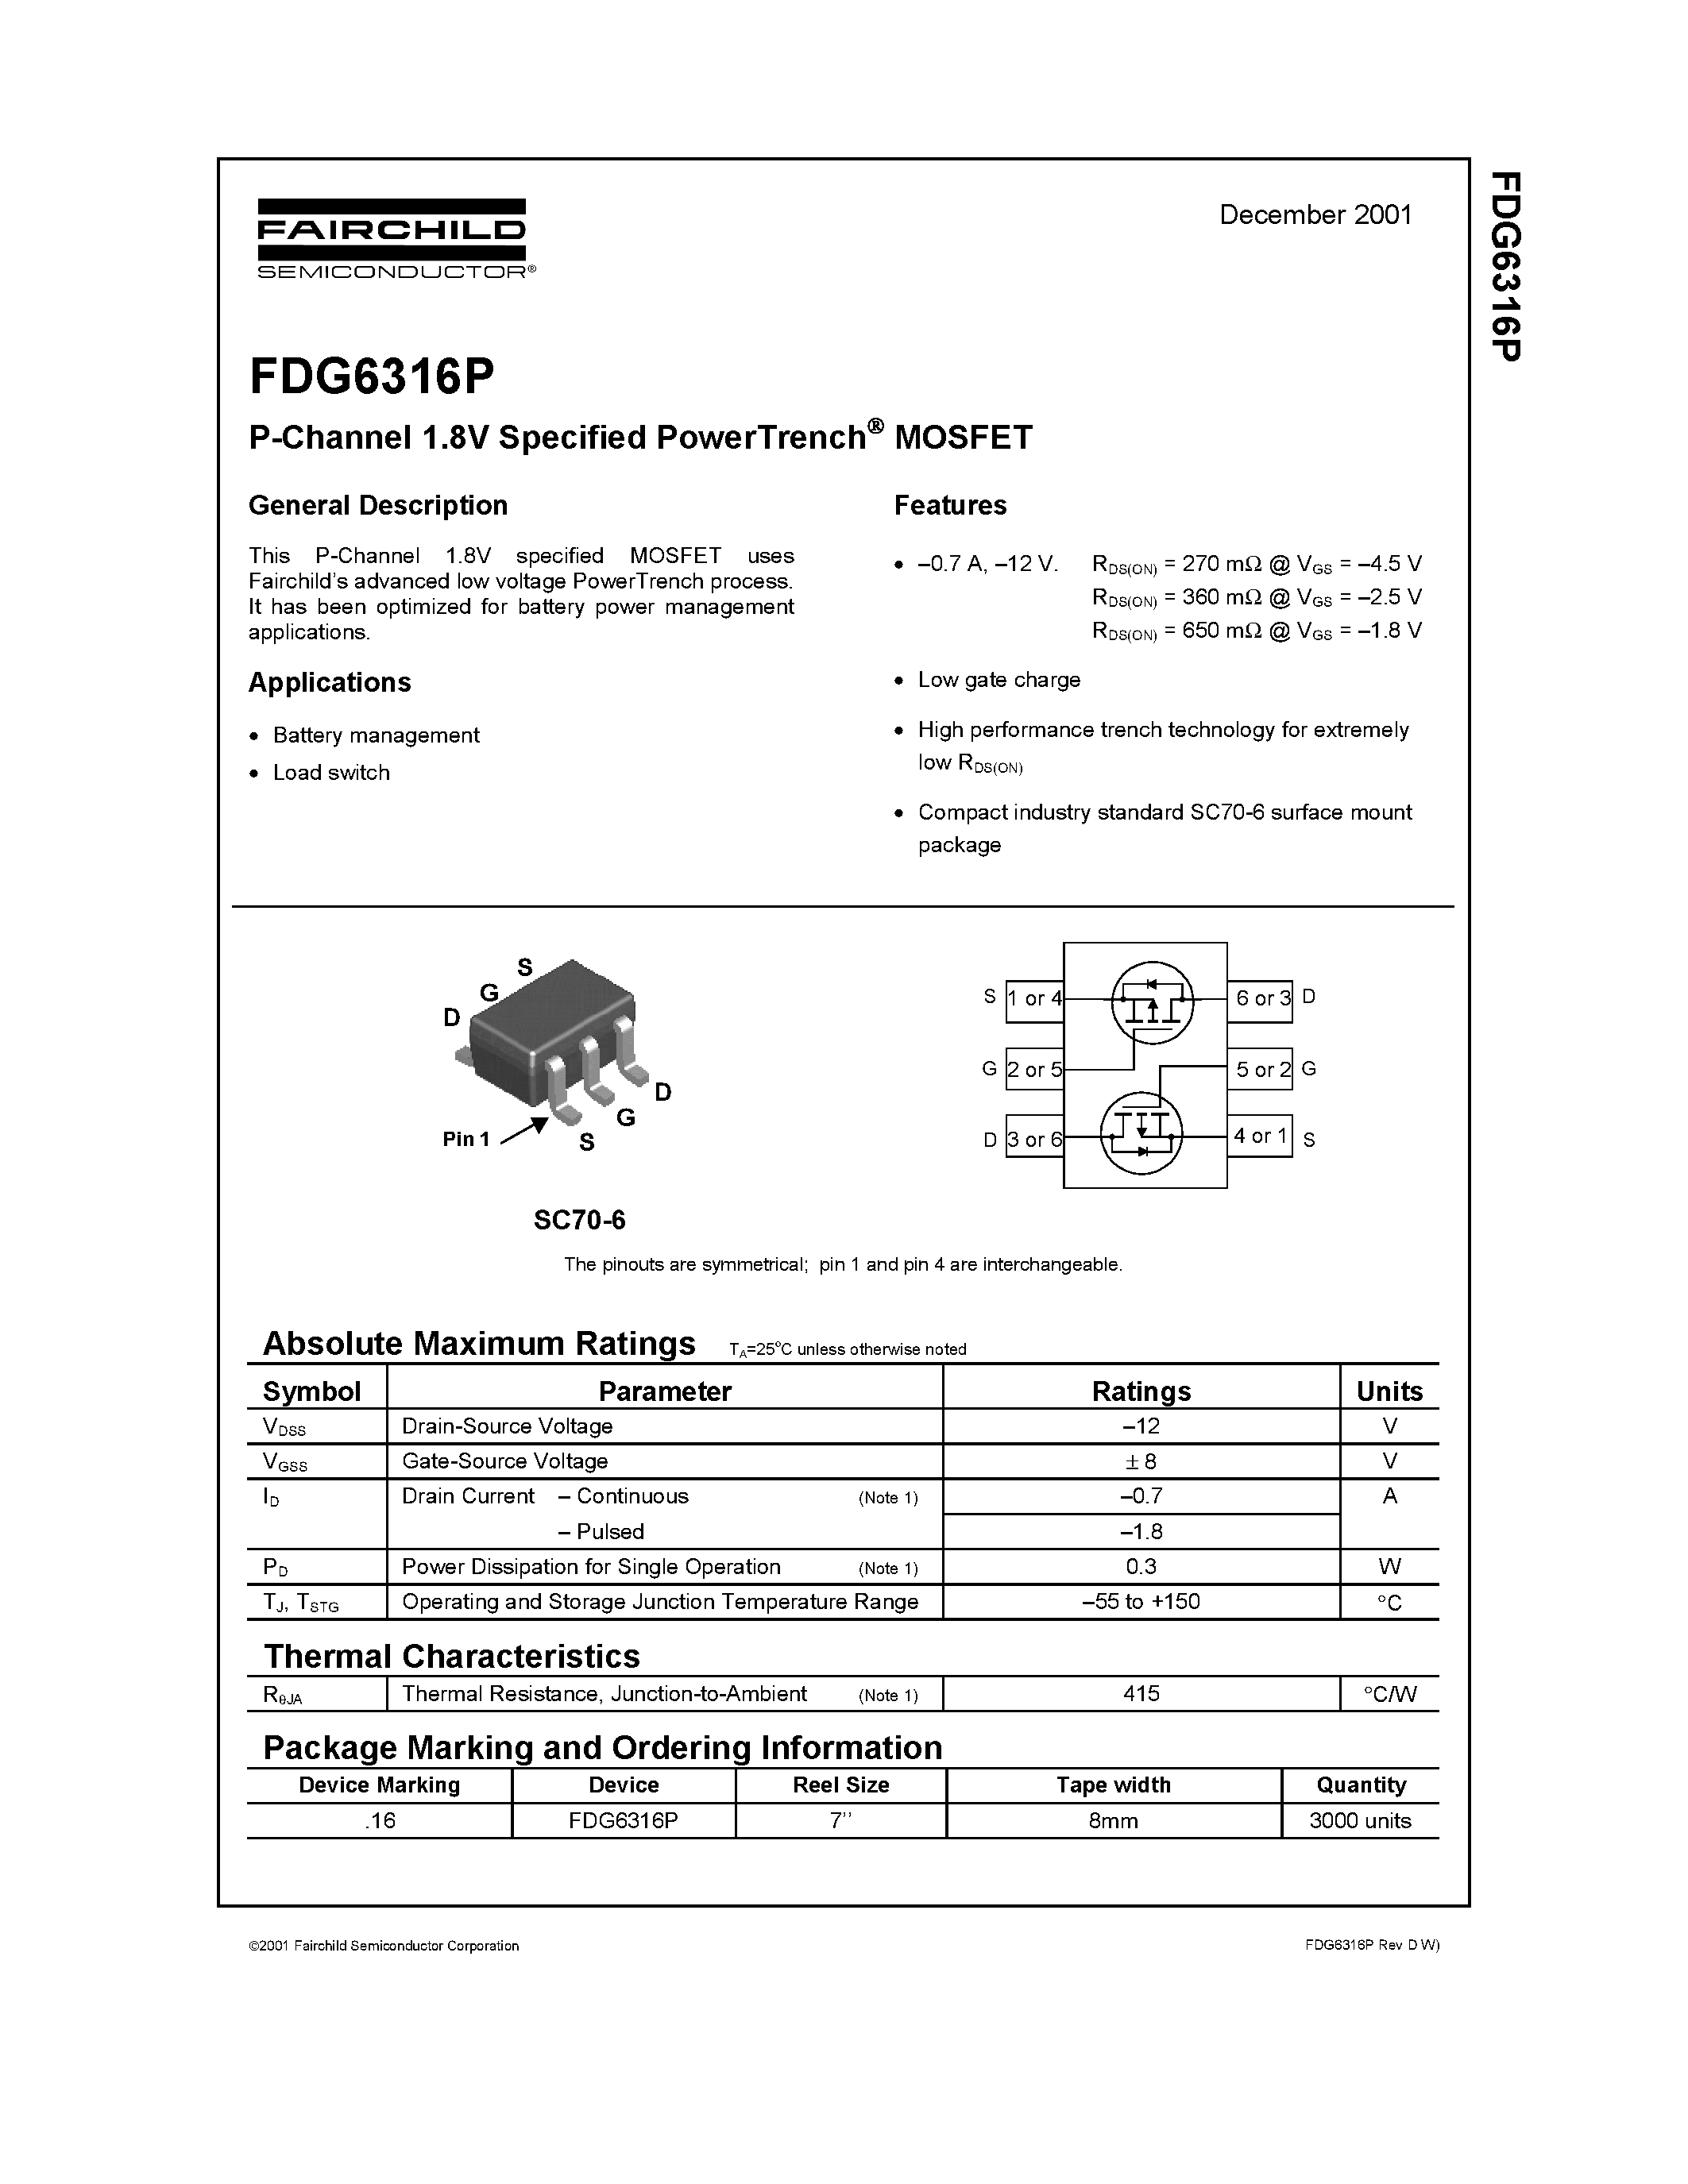 Datasheet FDG6316P - P-Channel 1.8V Specified PowerTrench MOSFET page 1